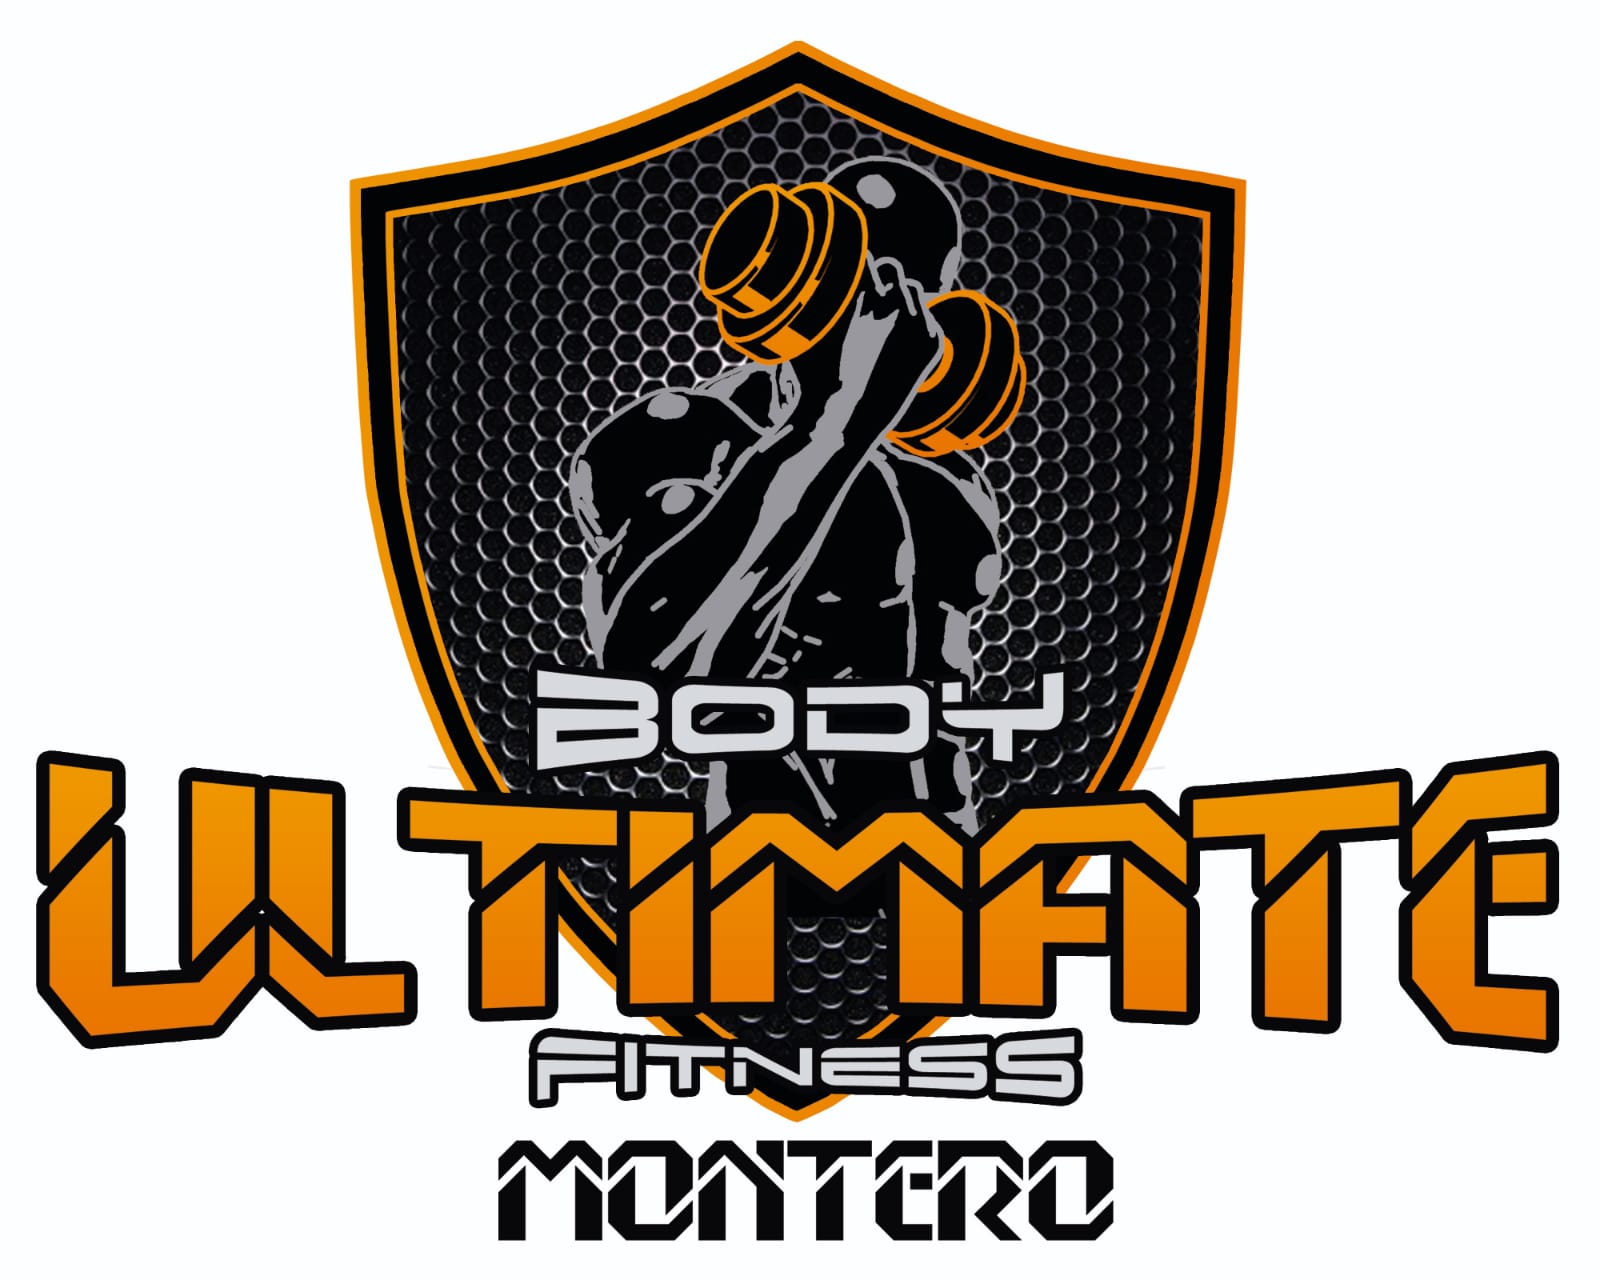 Images/Gyms/Body Ultimate Fitness Montero.jpeg